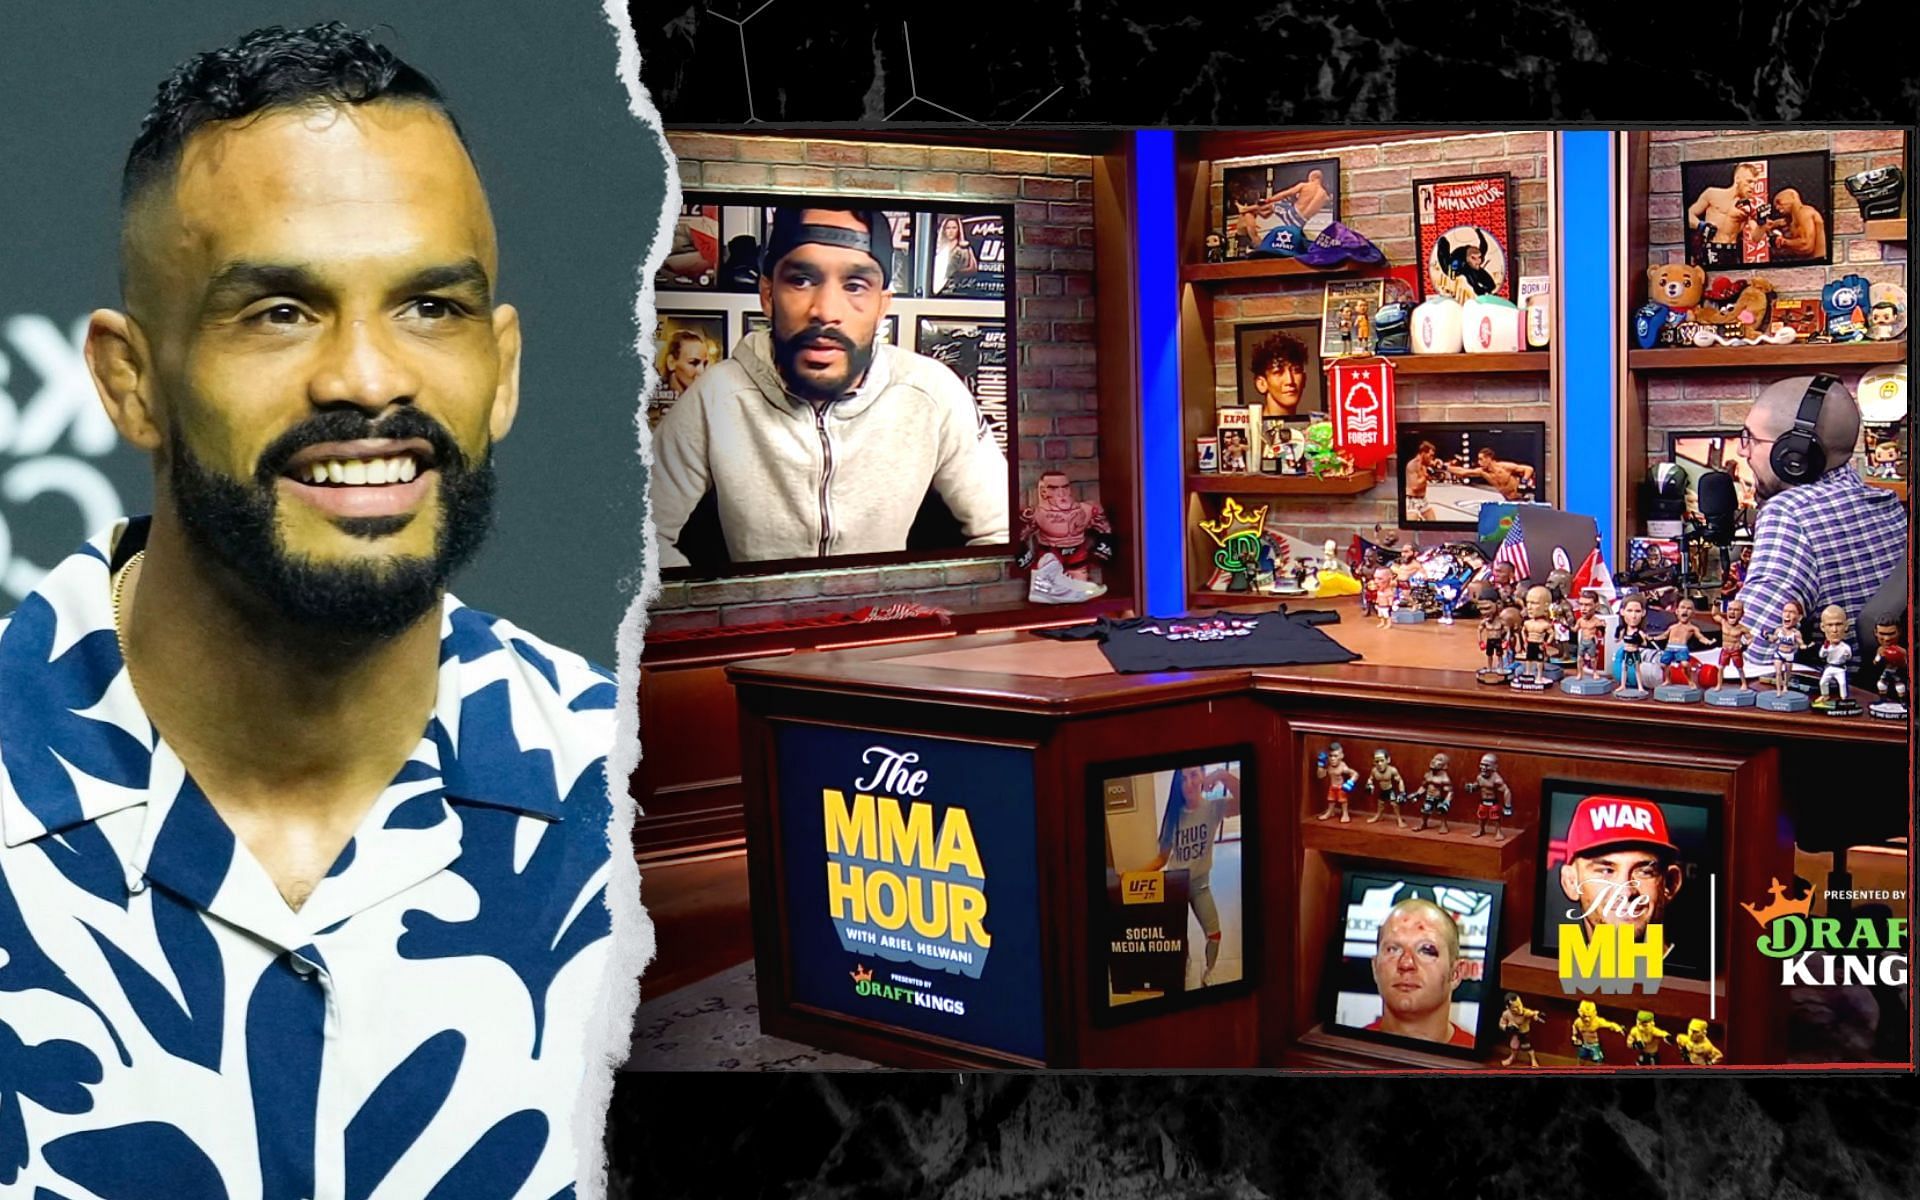 Rob Font names the fighter he refused to face during his year lay-off. [Image credits: @TheMMAHour on YouTube]